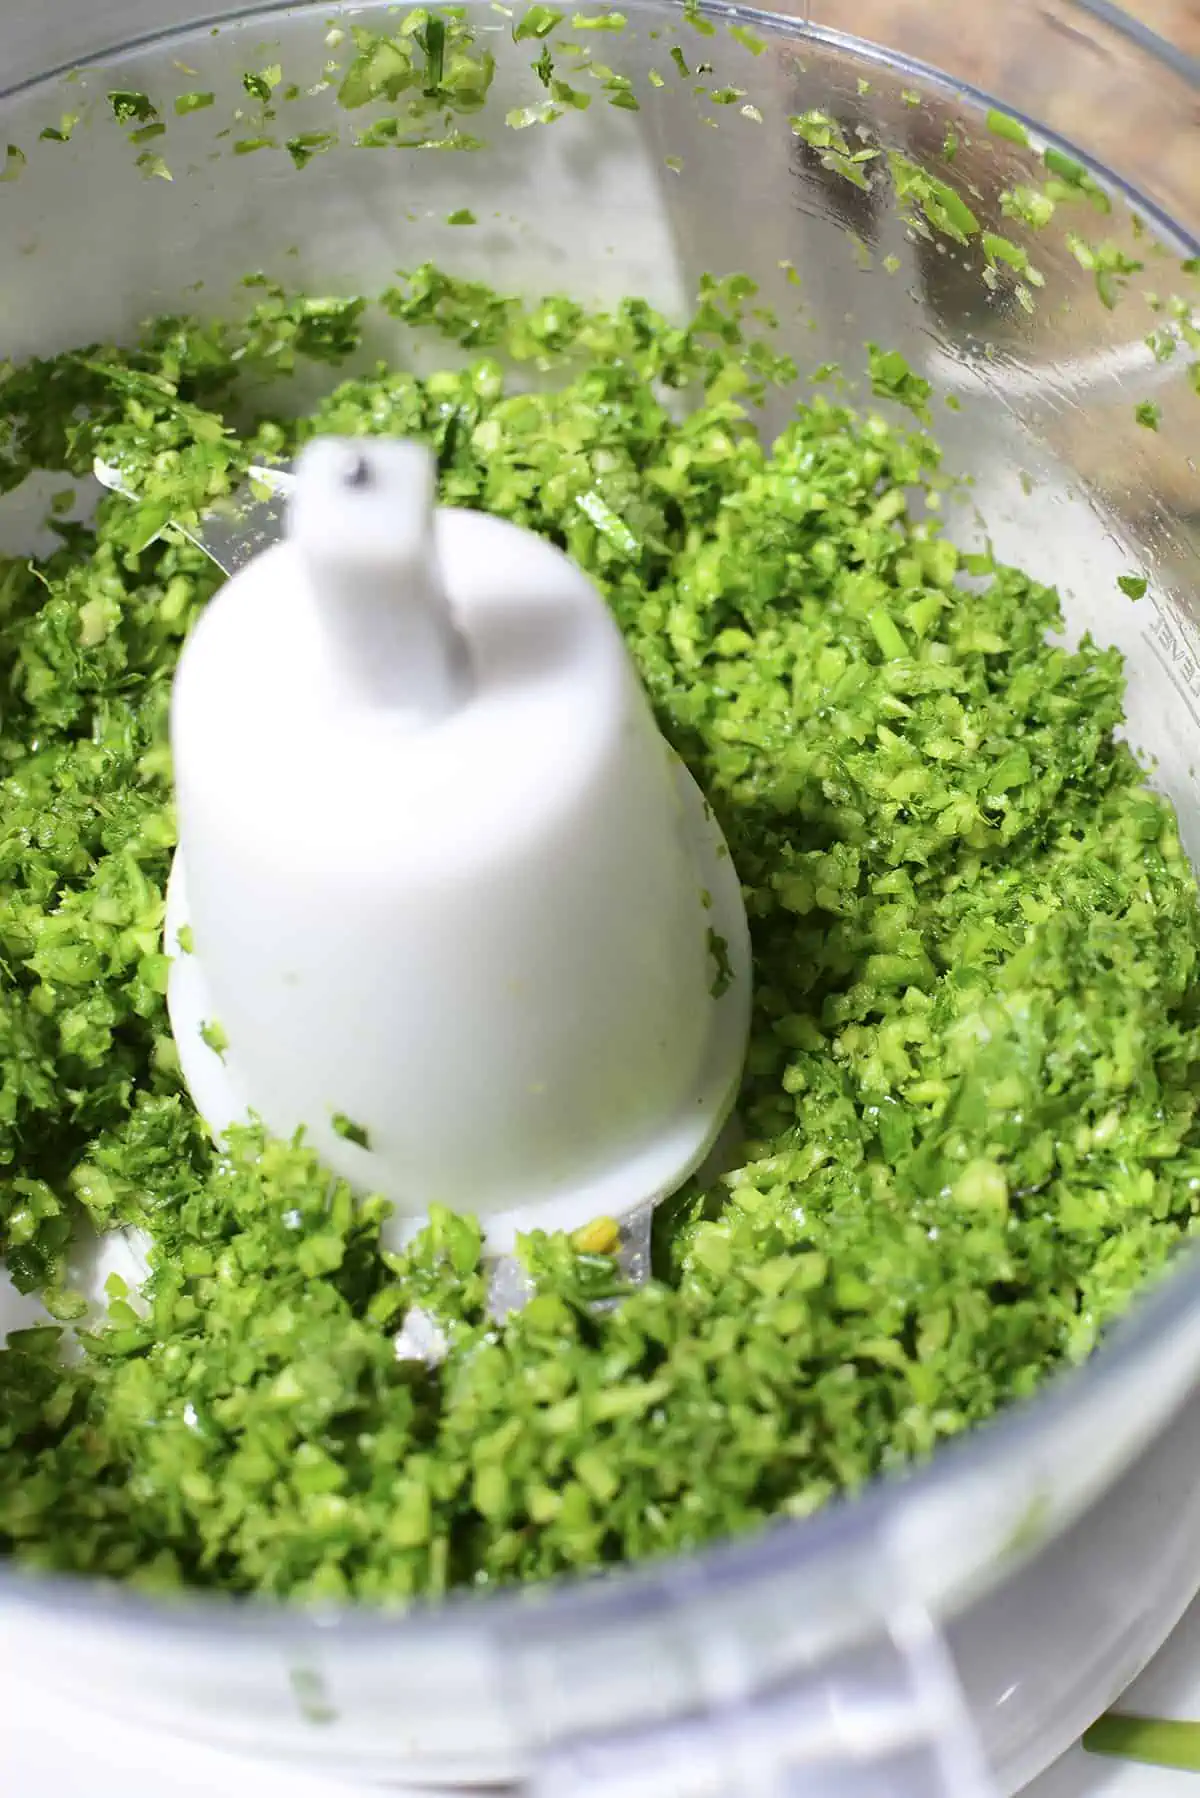 The food processor with chopped garlic scapes and herbs.